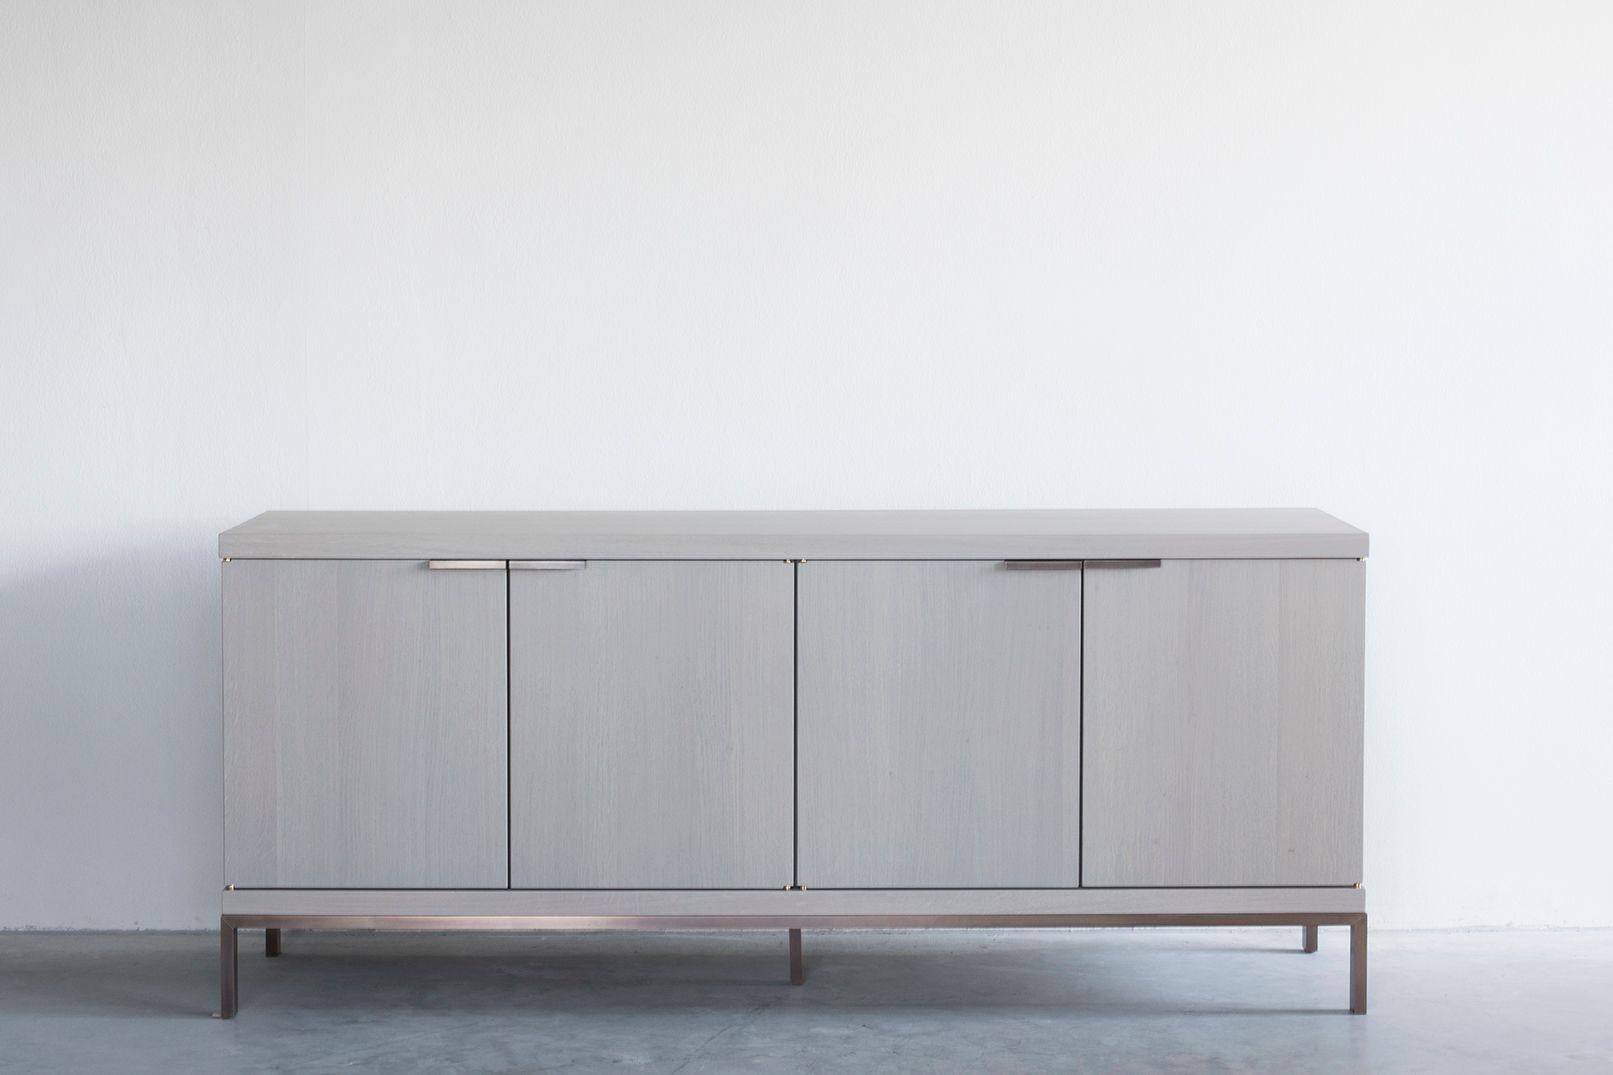 Nota Bene sideboard by Van Rossum
Dimensions: D181 x W49 x H75 cm
Materials: Oak, brass.

The wood is available in all standard Van Rossum colors, or in a matching finish to customer’s own sample.
Detailing is available in stainless steel or